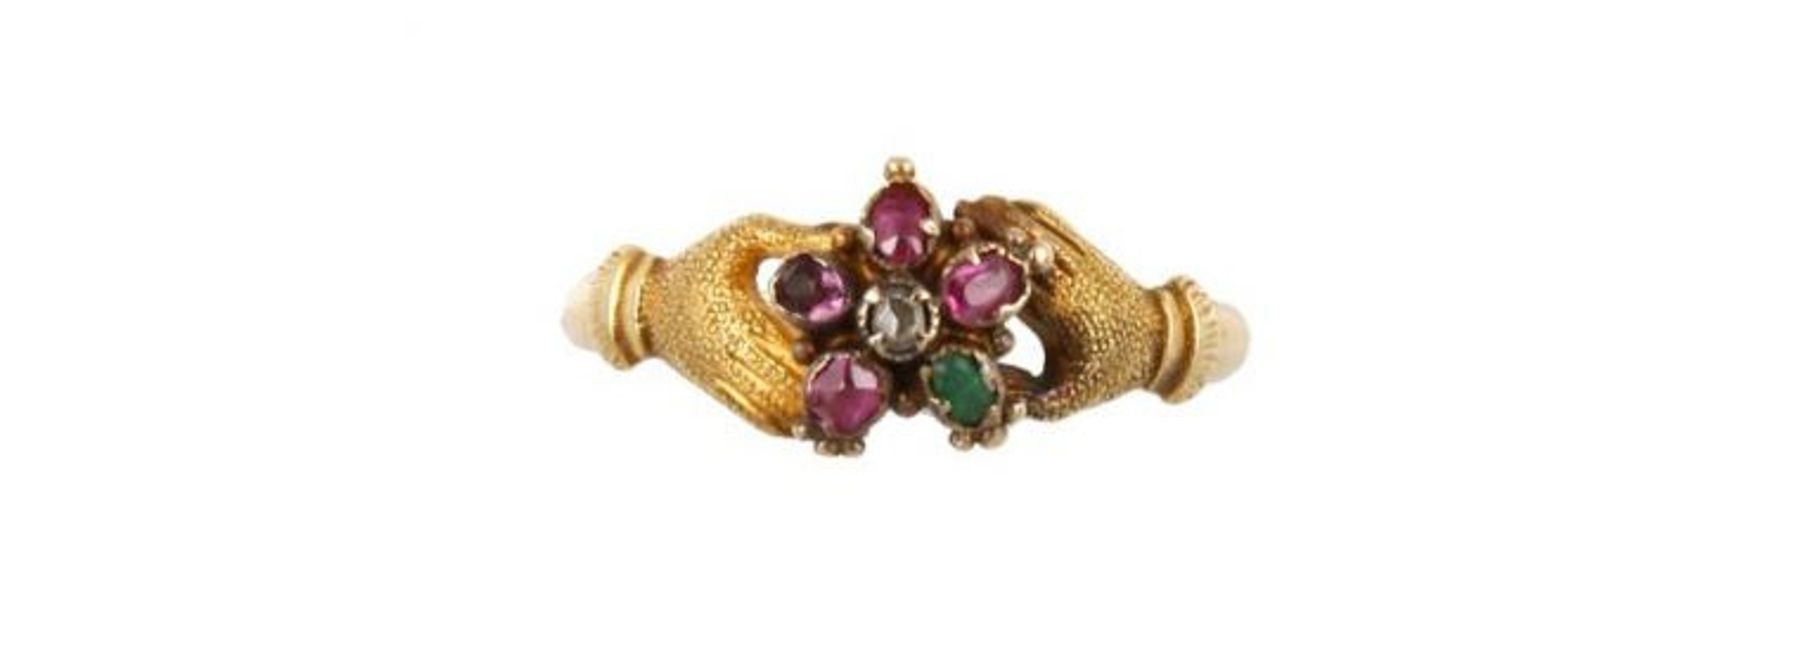 A 16th century amuletic jewelry the ivory hand wearing gold rings set with an emerald and a garnet